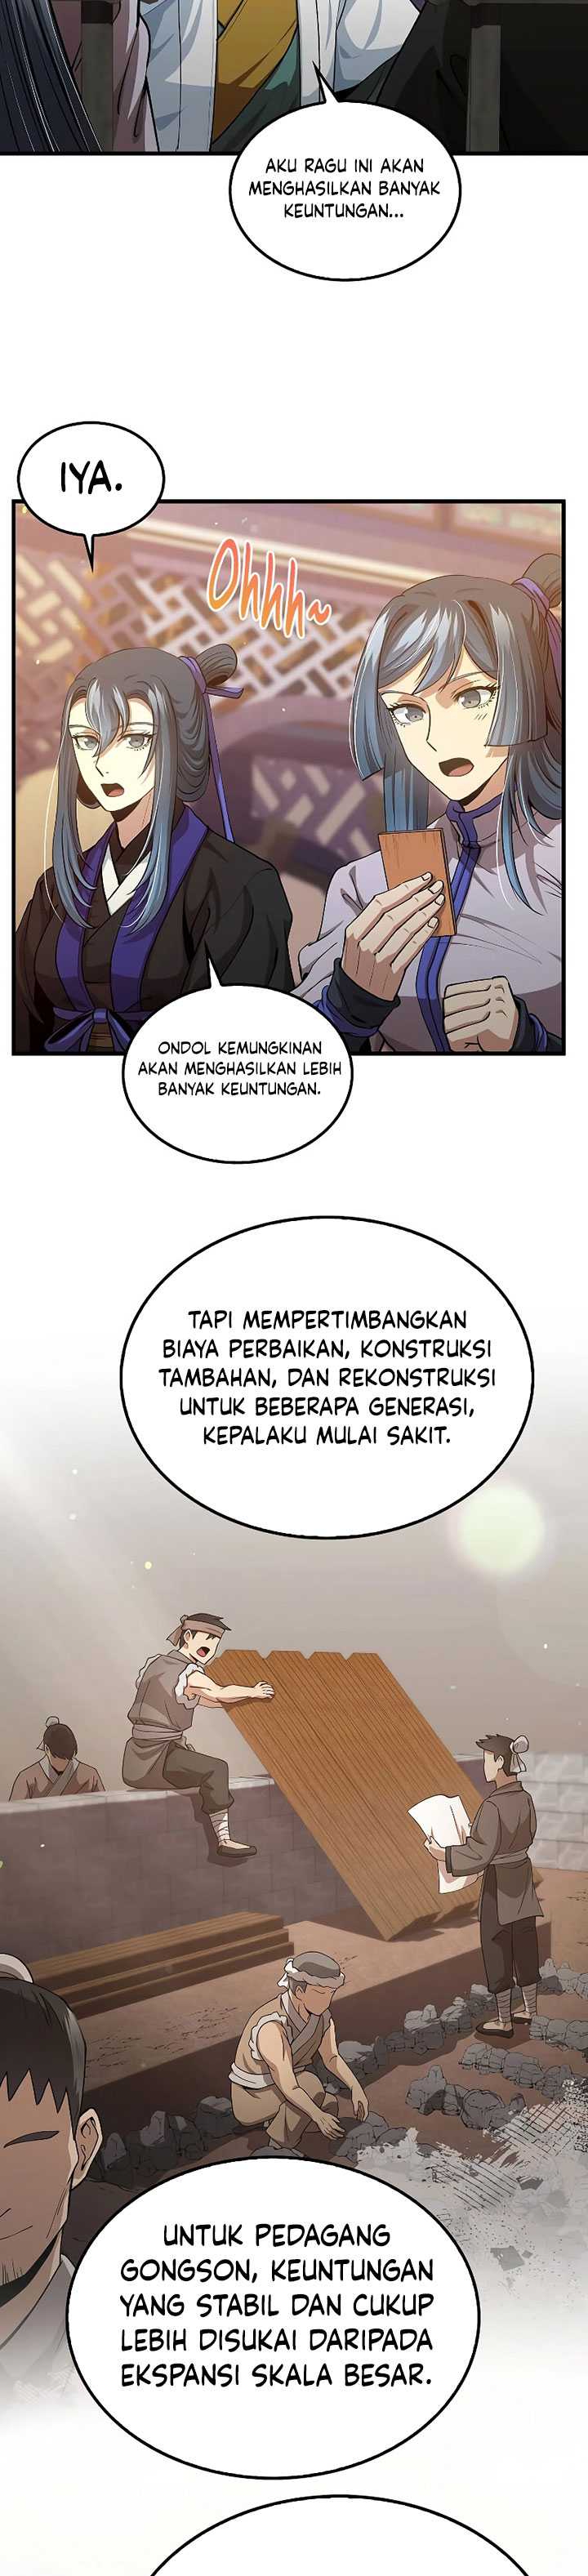 Doctor’s Rebirth Chapter 149